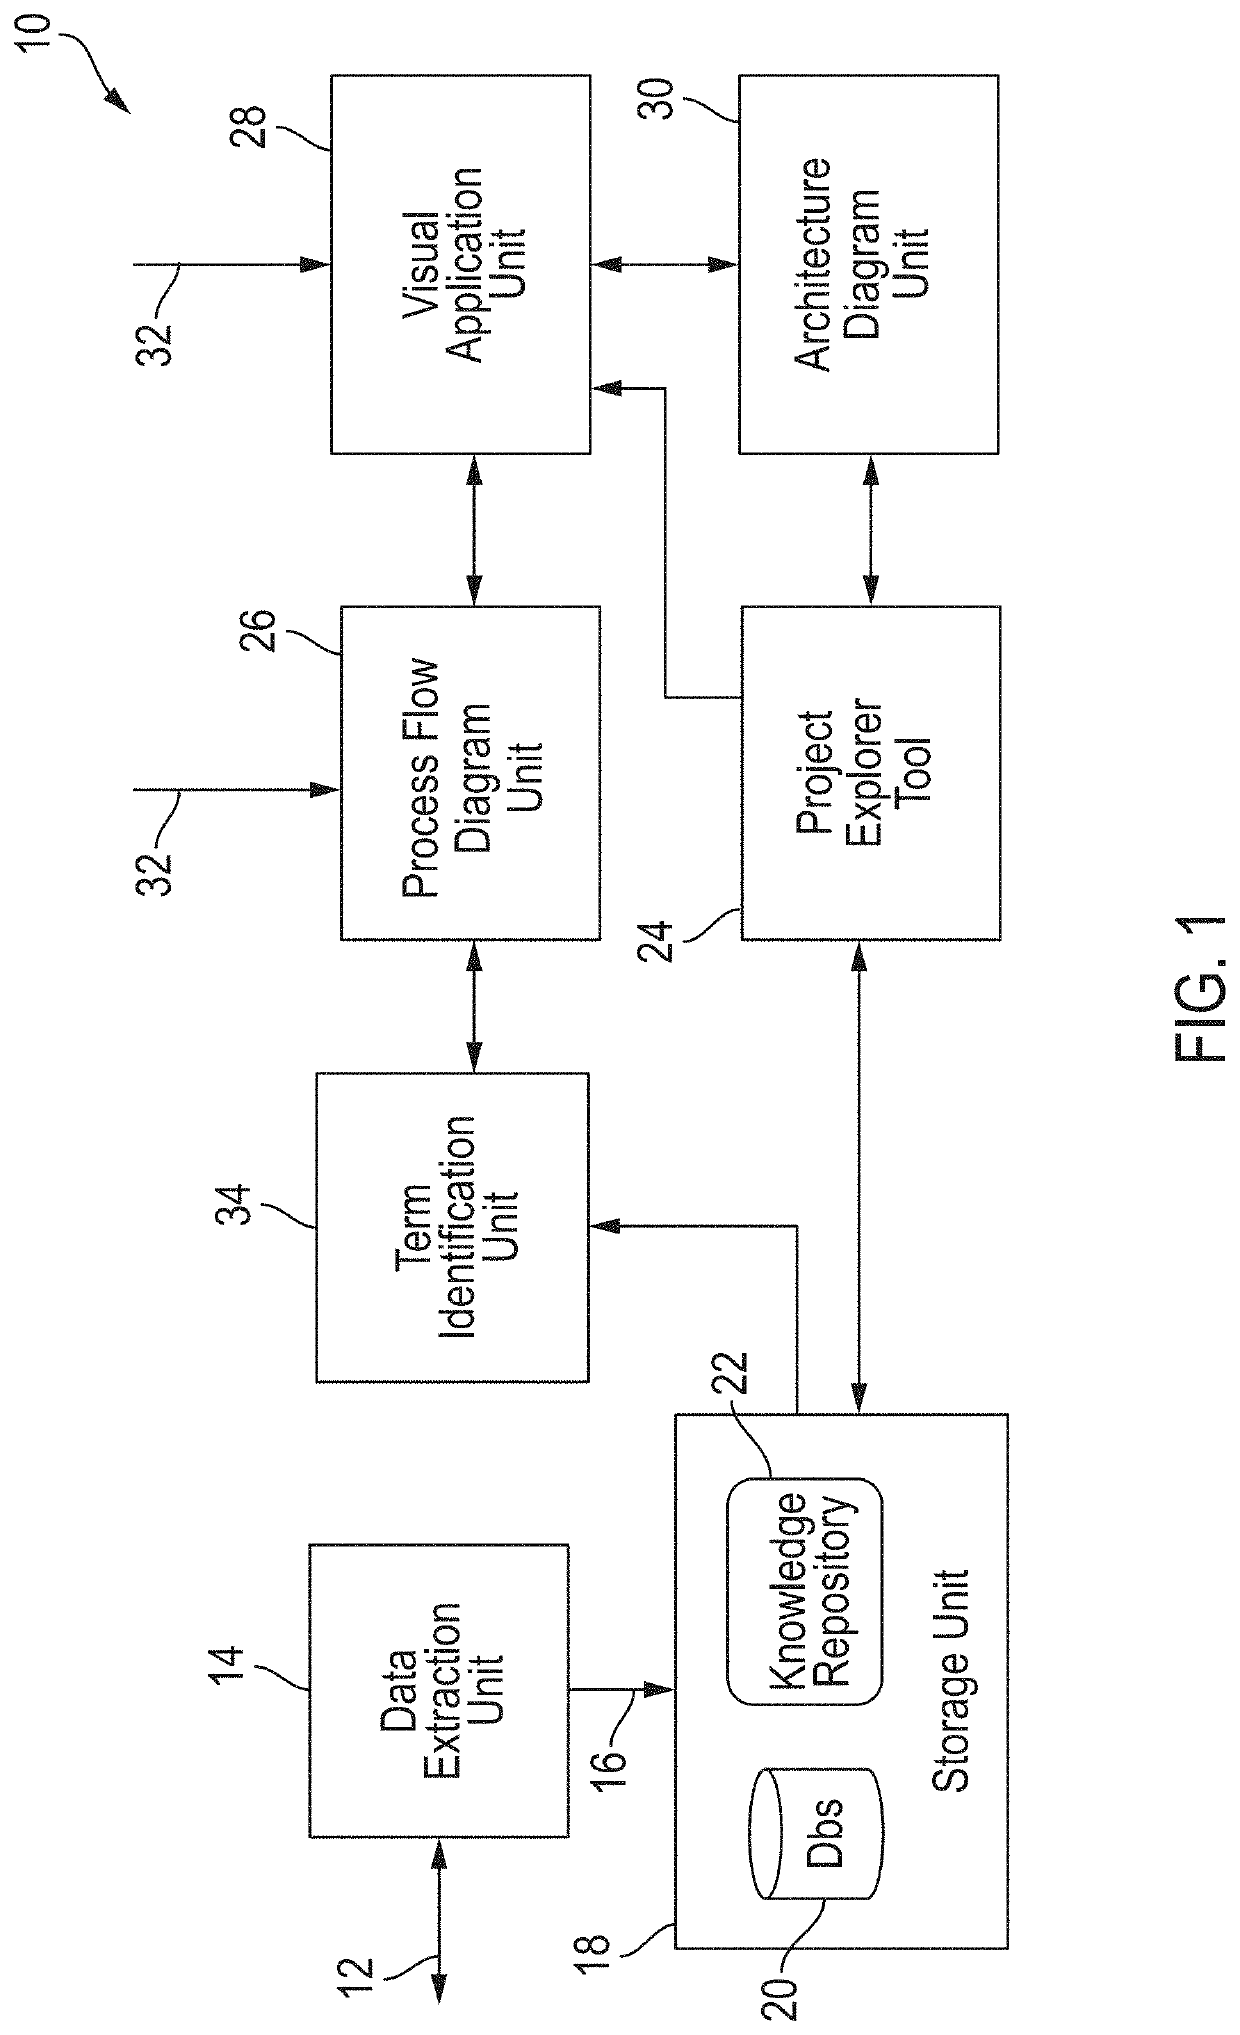 System and method for creating a process flow diagram which incorporates knowledge of business terms